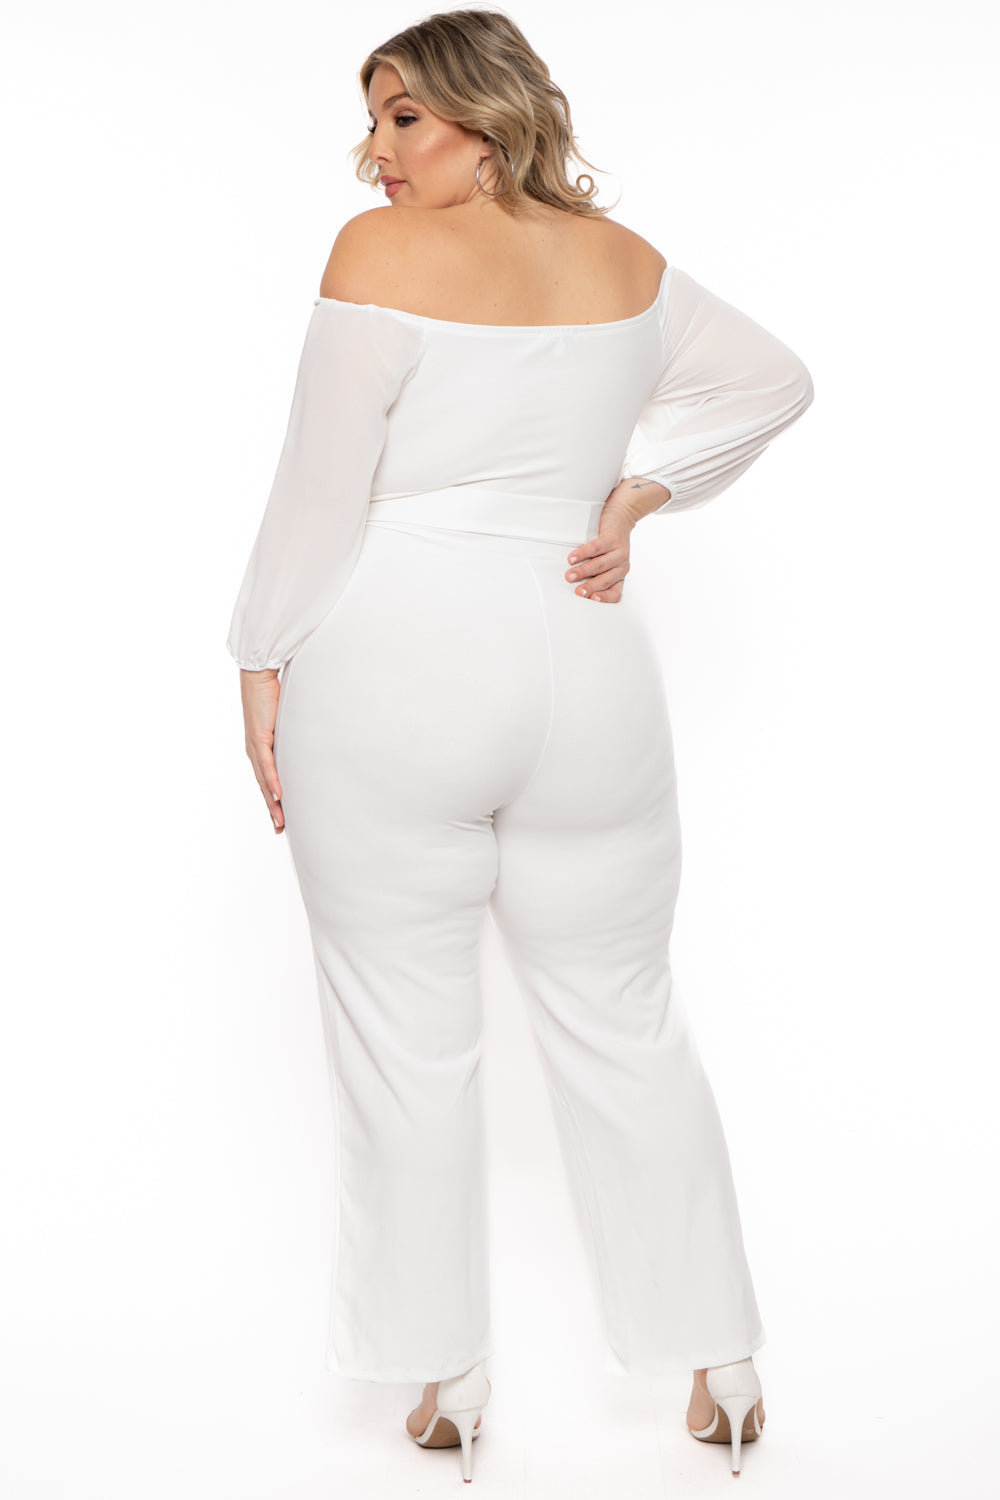 Find Me Jumpsuits and Rompers Plus Size Aryana Cross Over Jumpsuit -Ivory